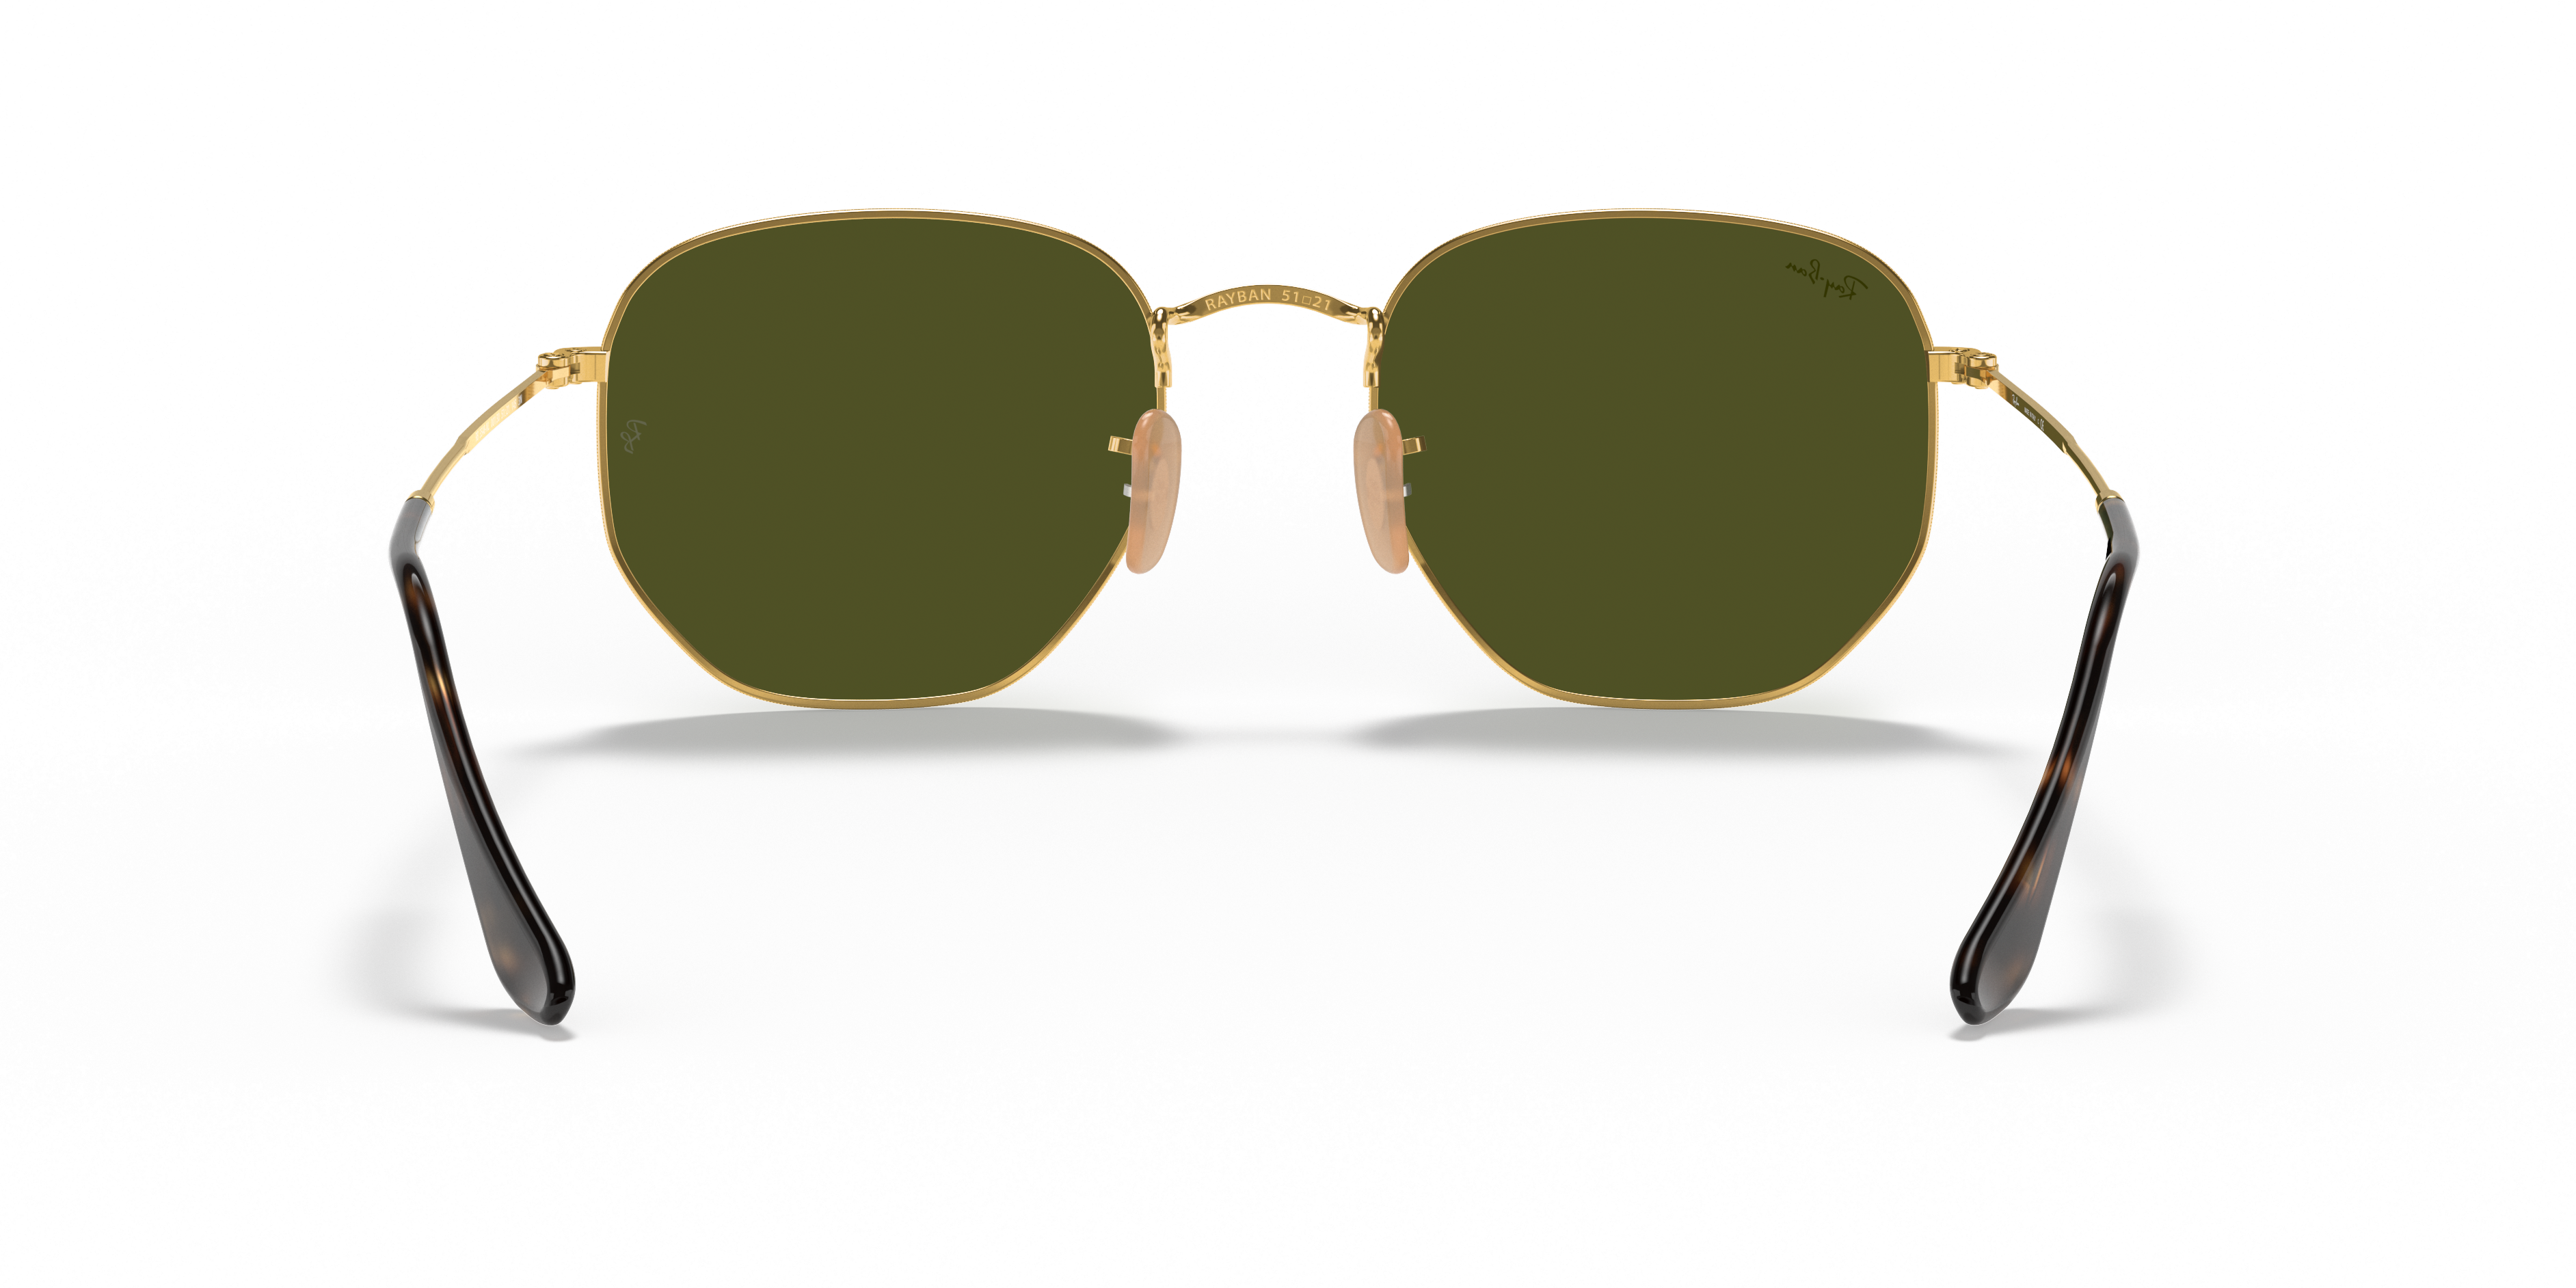 Hexagonal Flat Lenses Sunglasses in Gold and Silver | Ray-Ban®